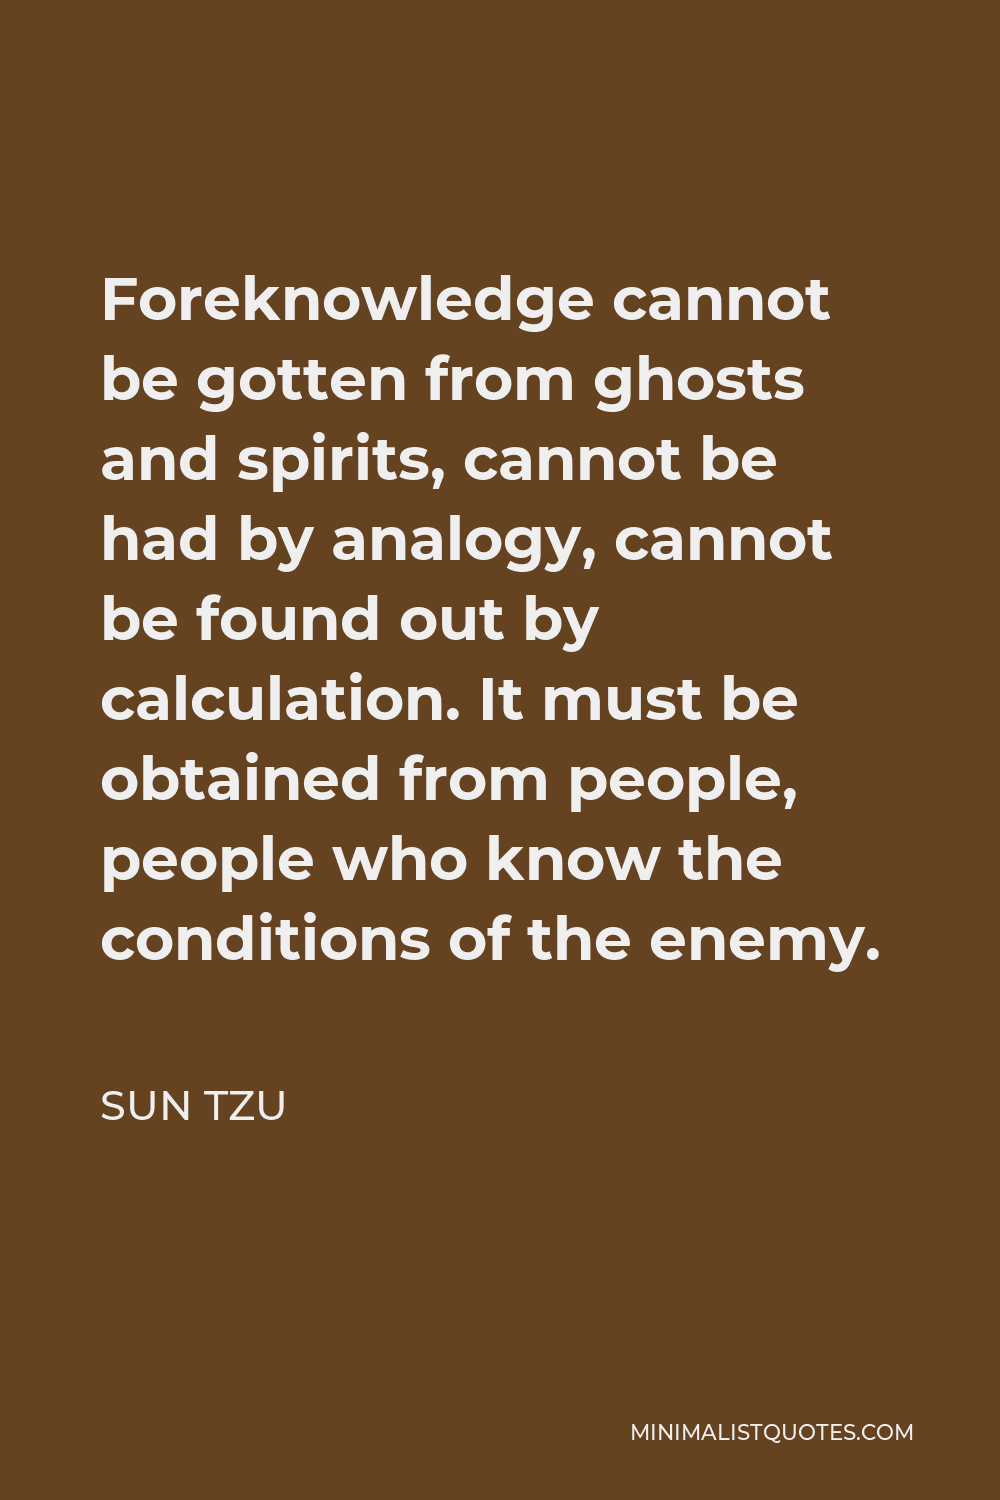 Sun Tzu Quote - Foreknowledge cannot be gotten from ghosts and spirits, cannot be had by analogy, cannot be found out by calculation. It must be obtained from people, people who know the conditions of the enemy.